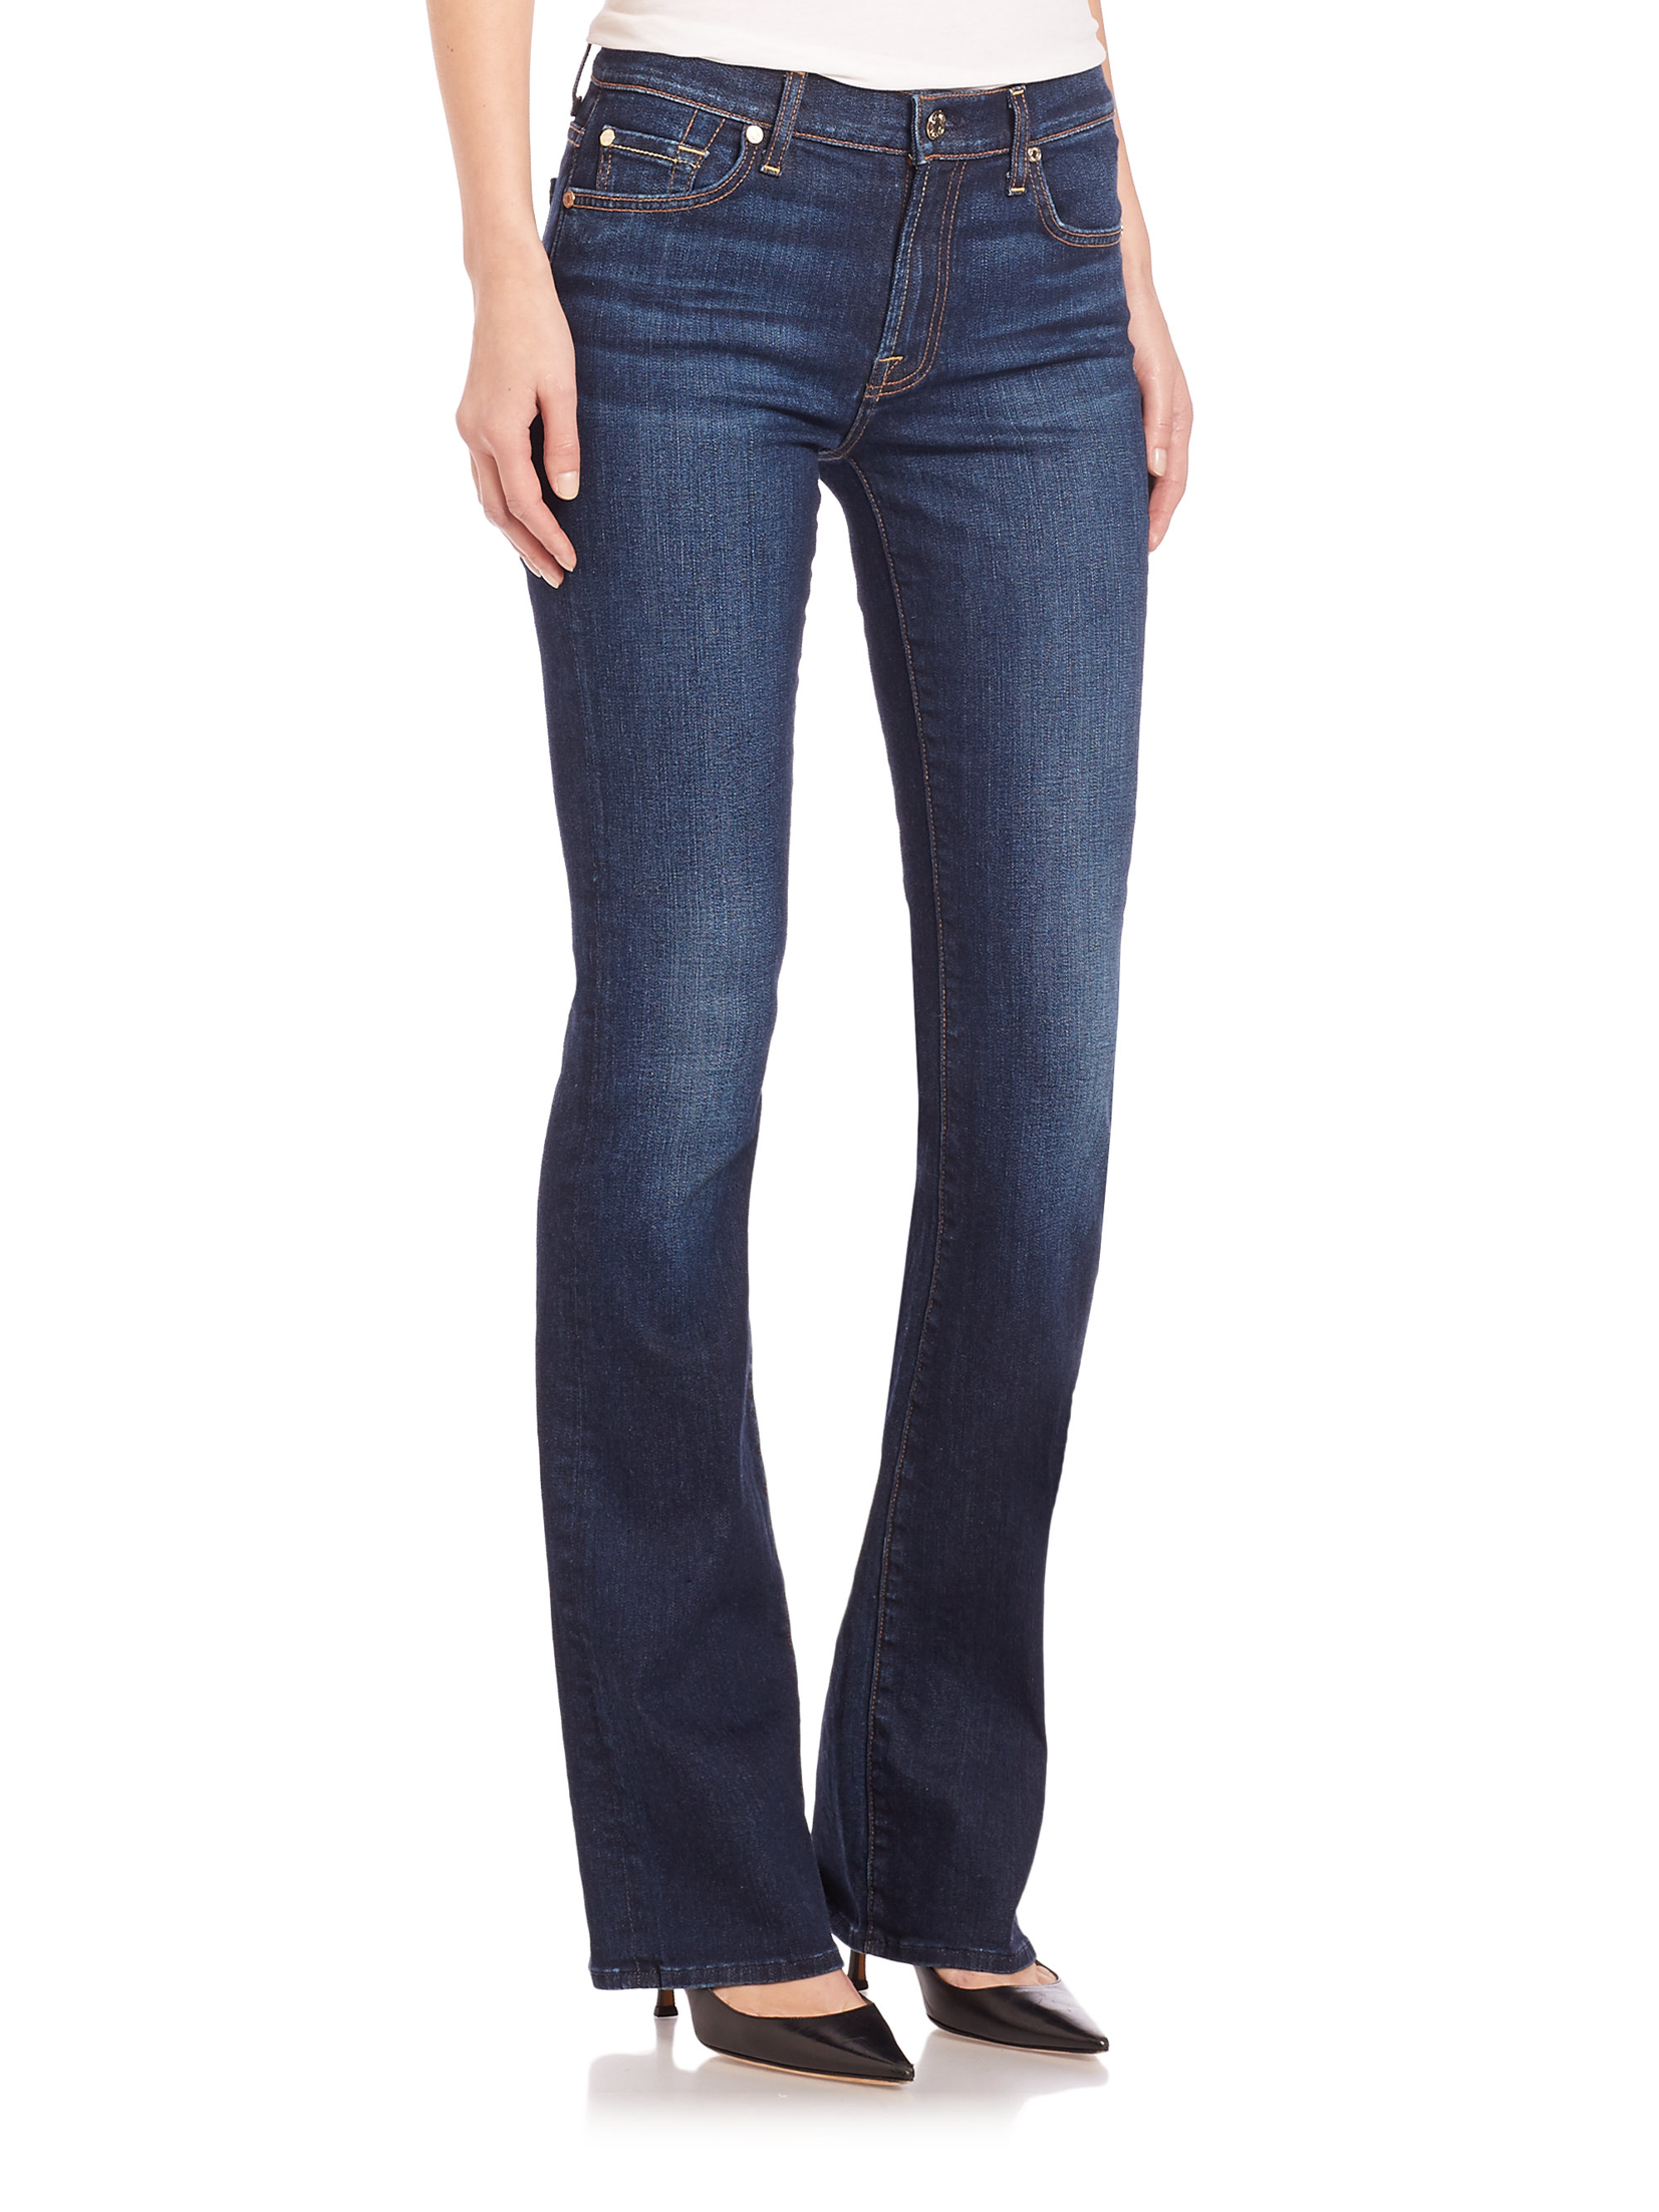 7 For All Mankind Iconic Tailorless Bootcut Jeans in Blue - Lyst